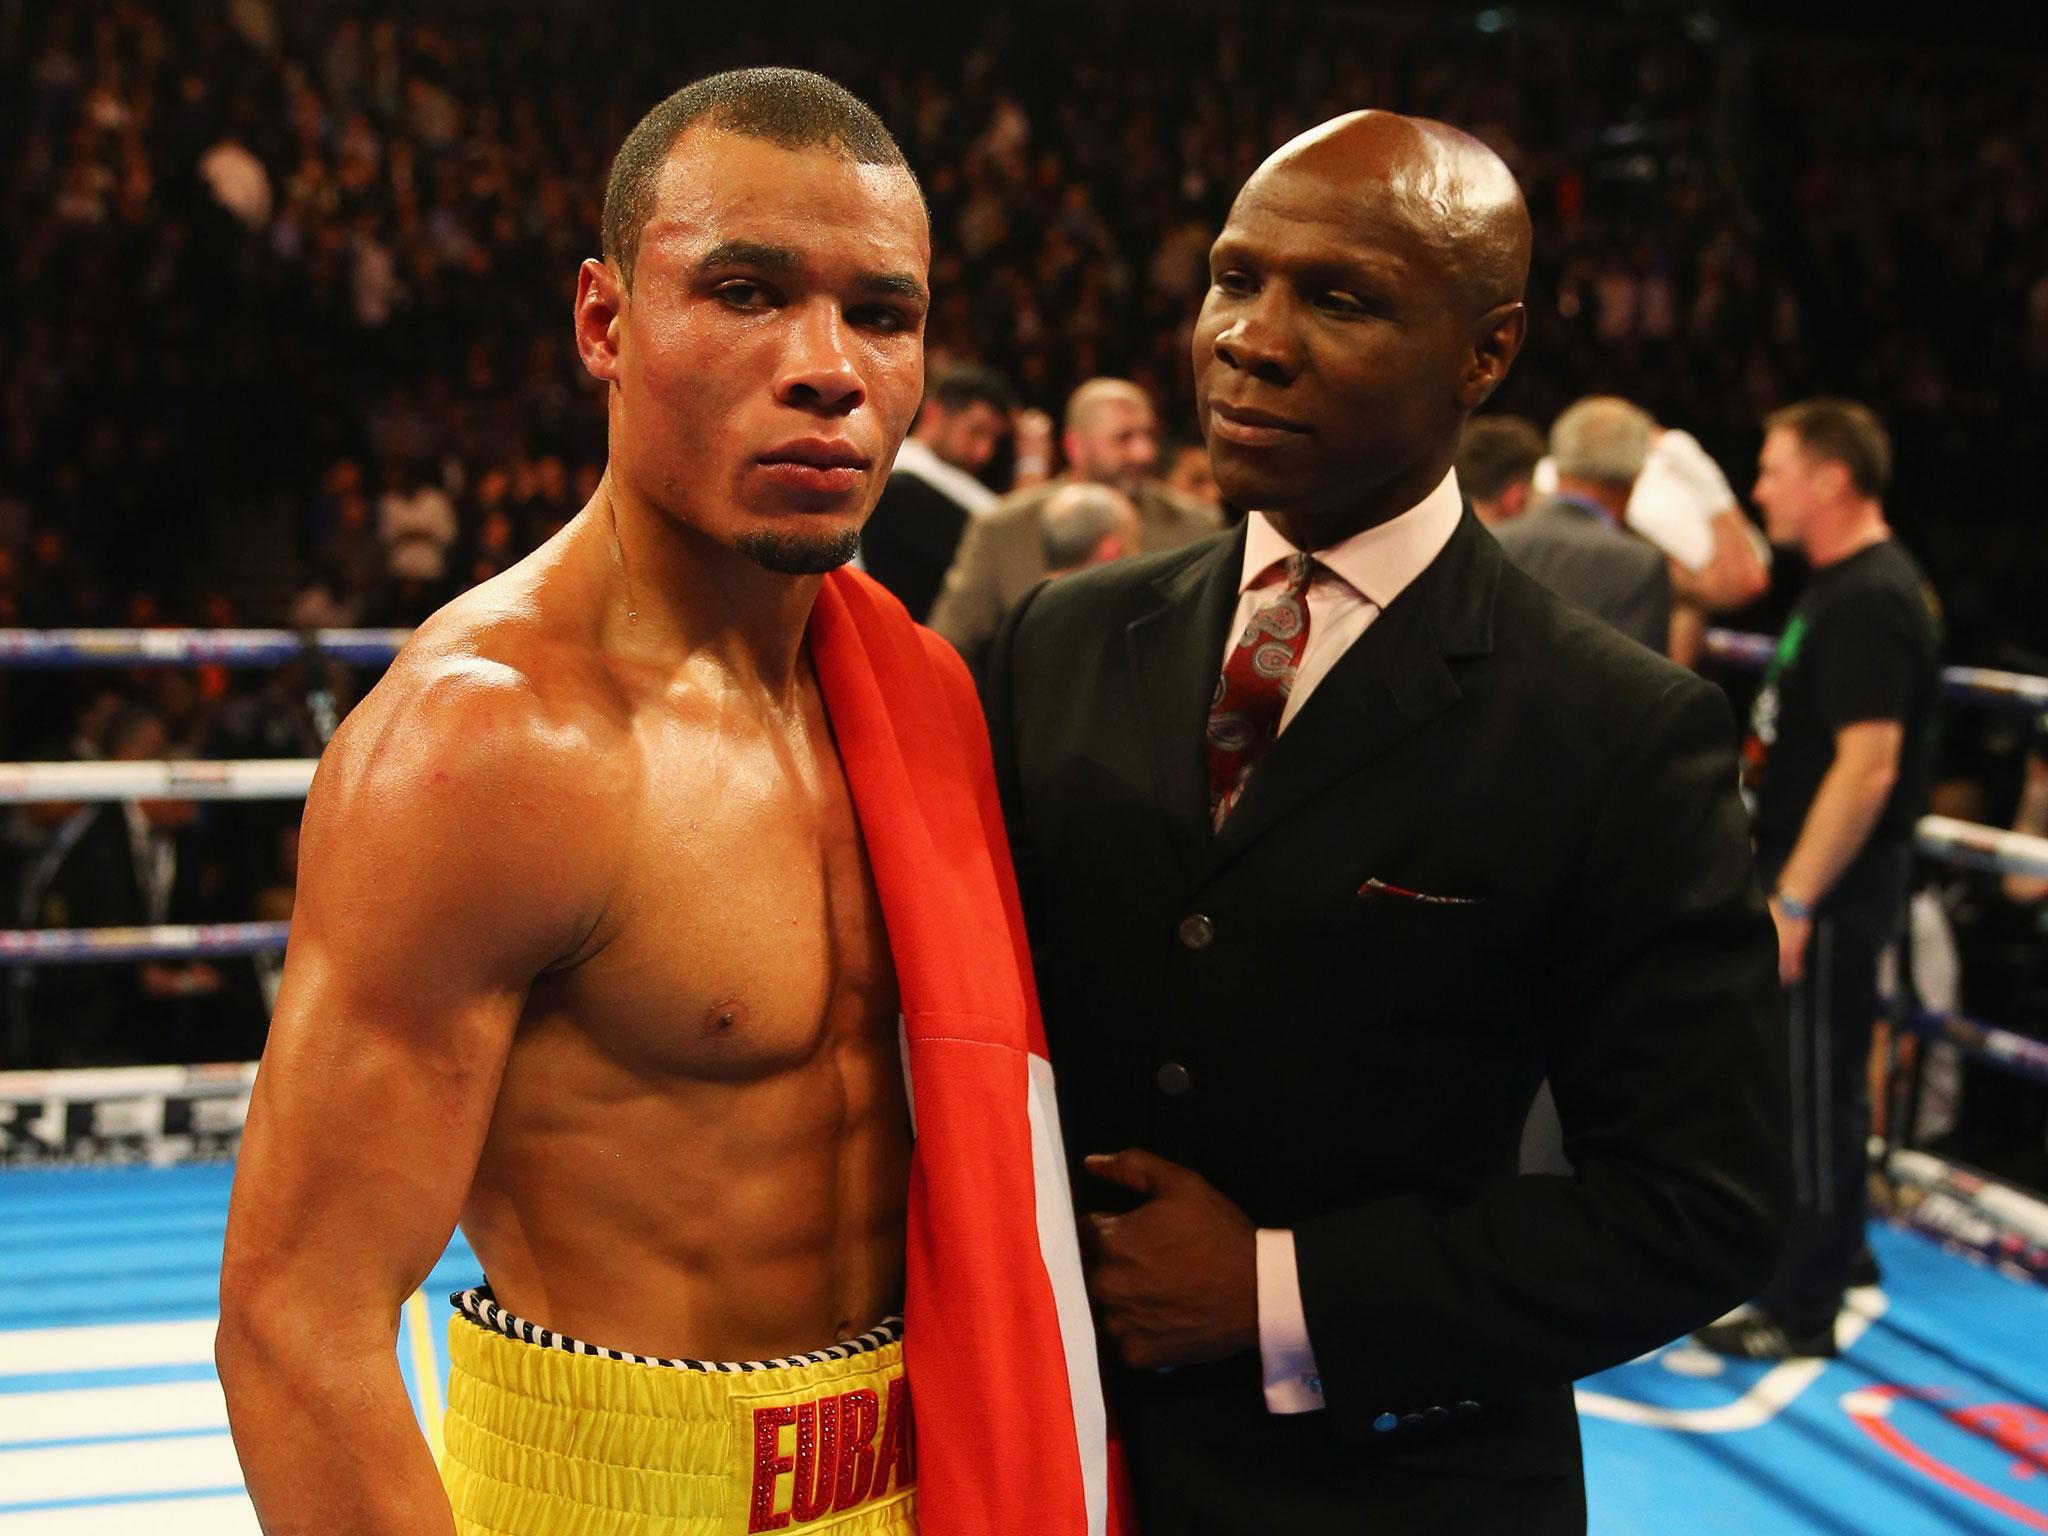 &#13;
Chris Eubank Jr won his first 18 fights before losing narrowly to Billy Joe Saunders in 2014 &#13;